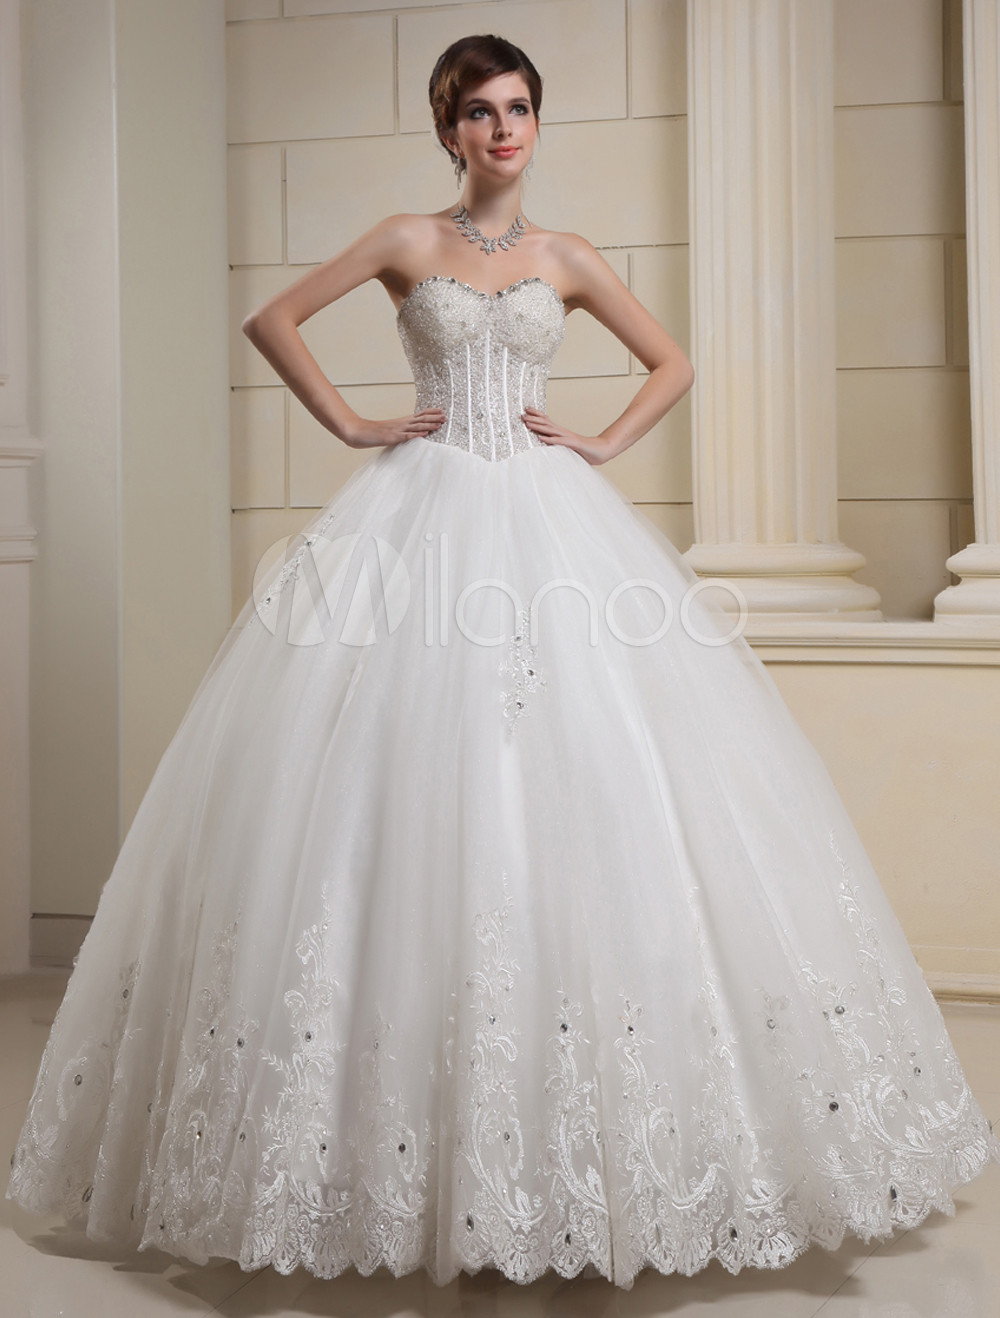 White Sweetheart Embroidered Studded Tulle Wedding Dress For Bride ...